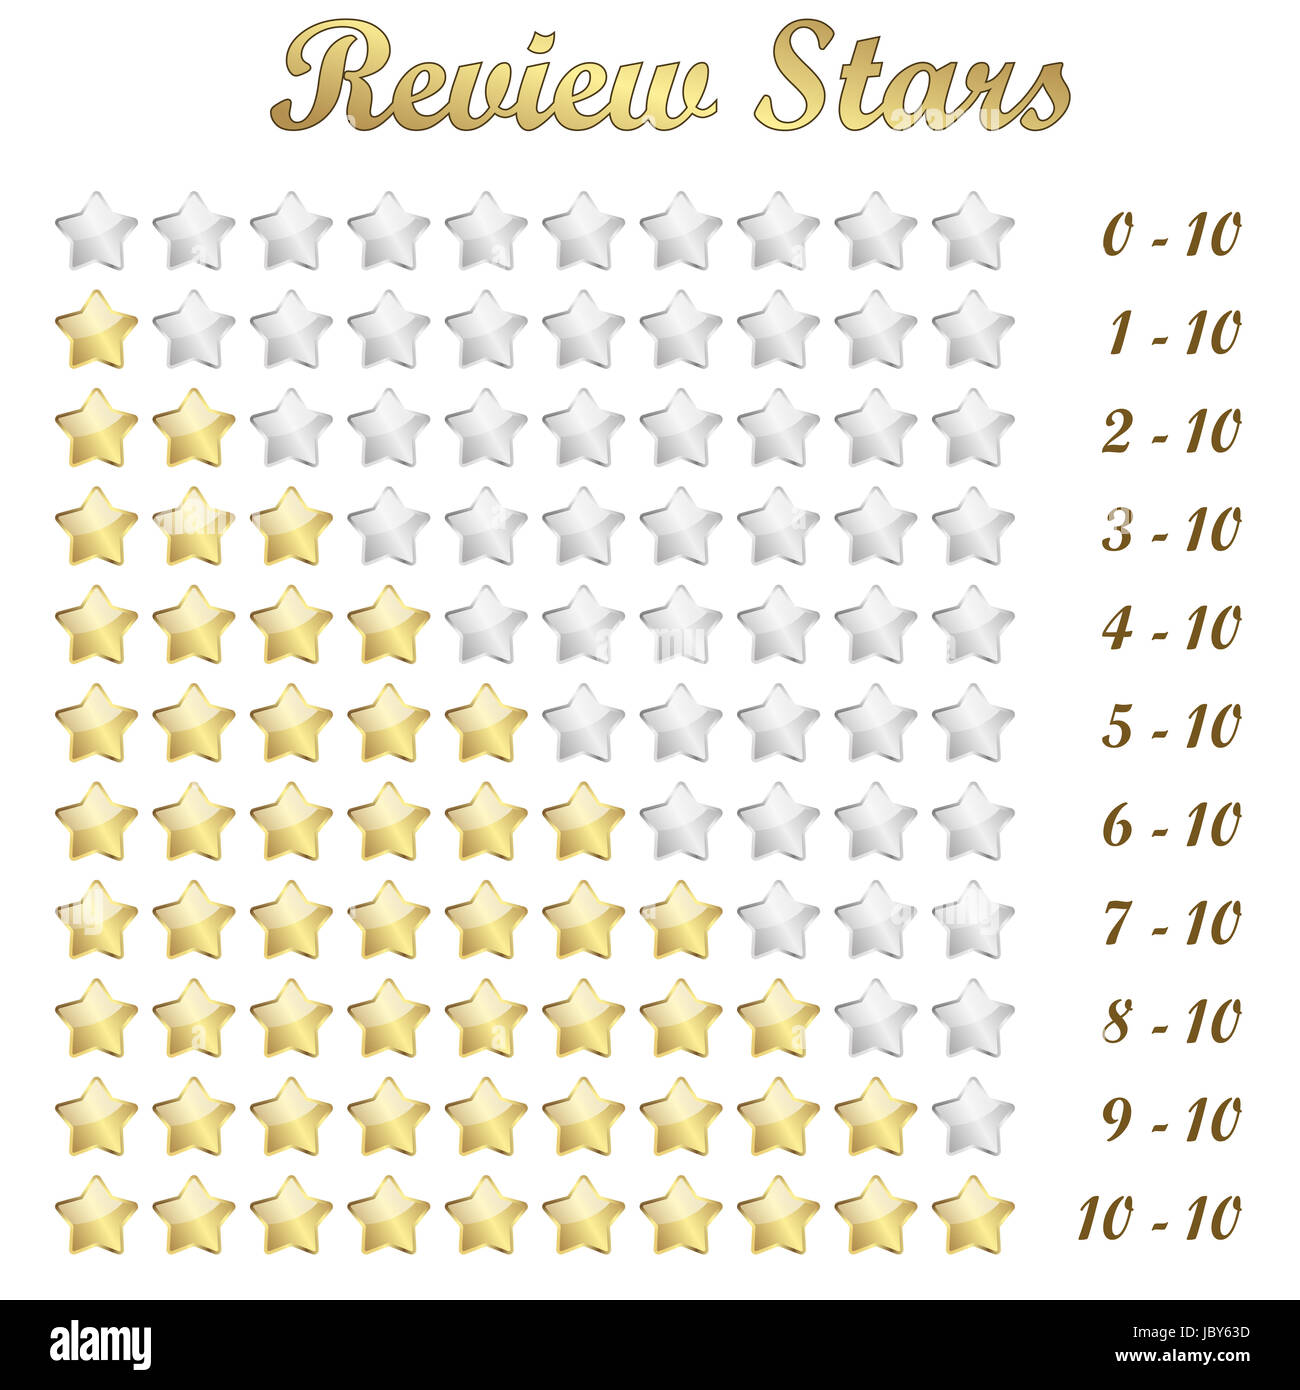 vector of golden review stars for rating Stock Photo